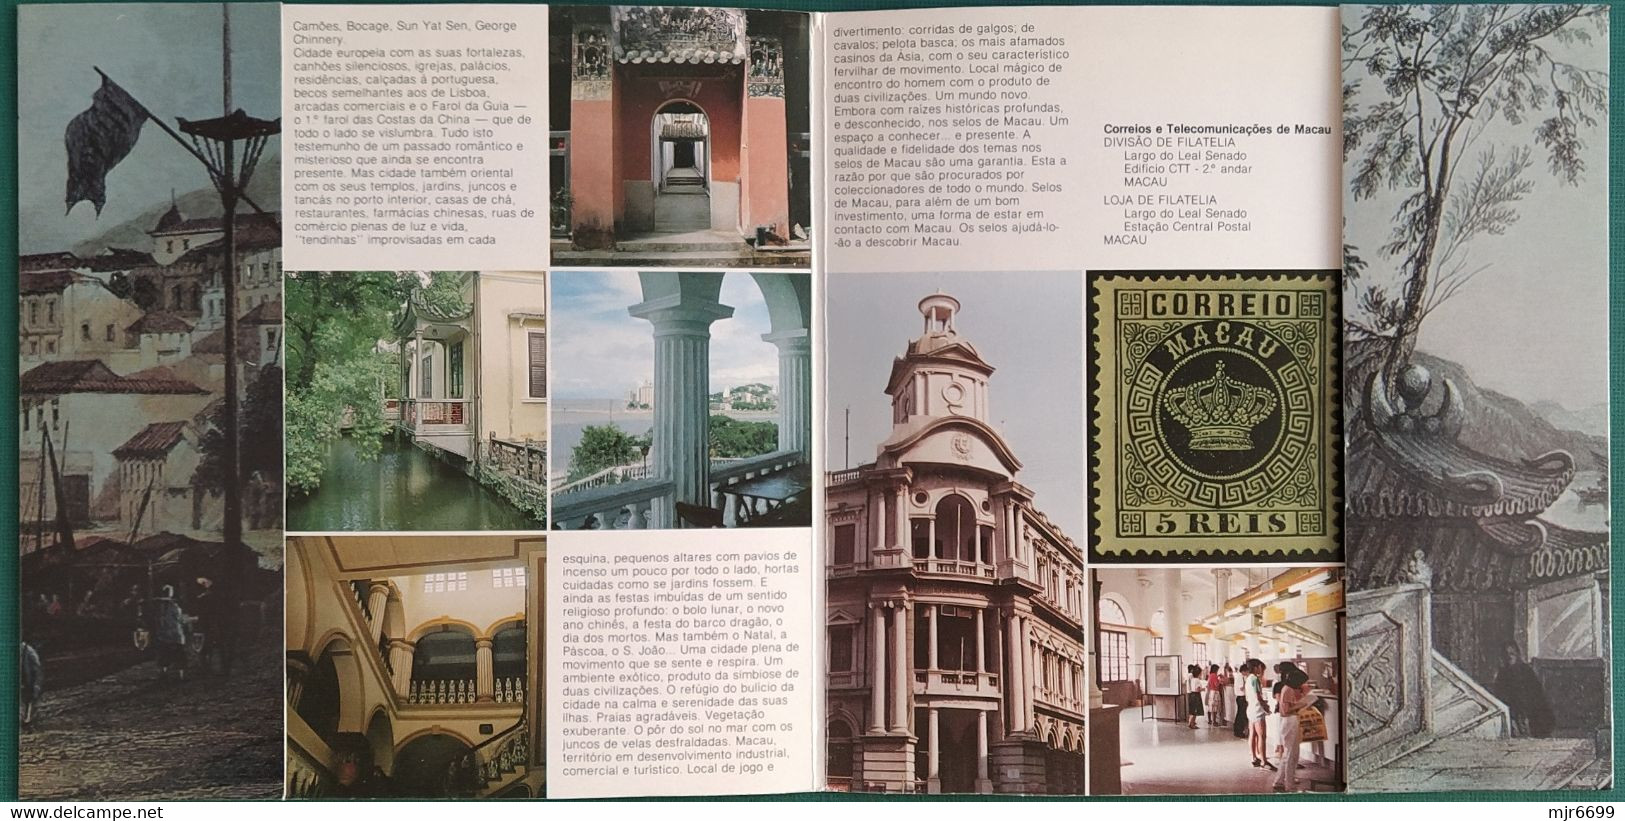 MACAU - 1983 YEAR BOOK WITH ALL STAMPS AND THE S\S. NO. 1 S\S CAT$180EURO - Annate Complete